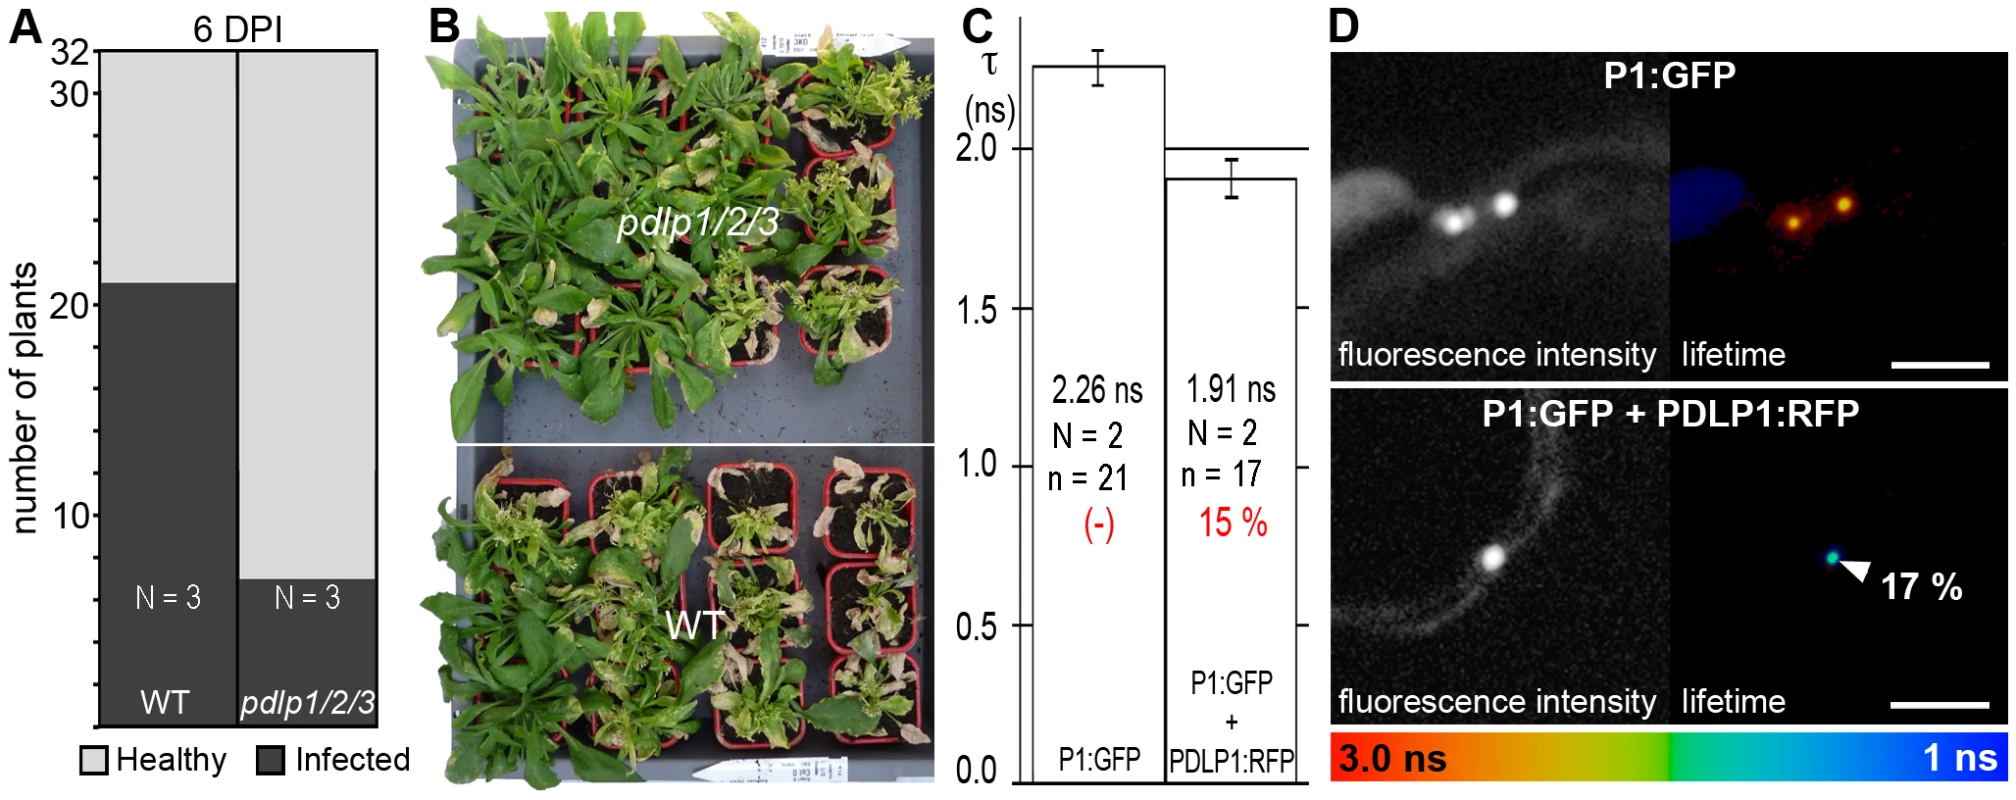 PDLPs are important contributors to CaMV movement <i>in planta</i>.